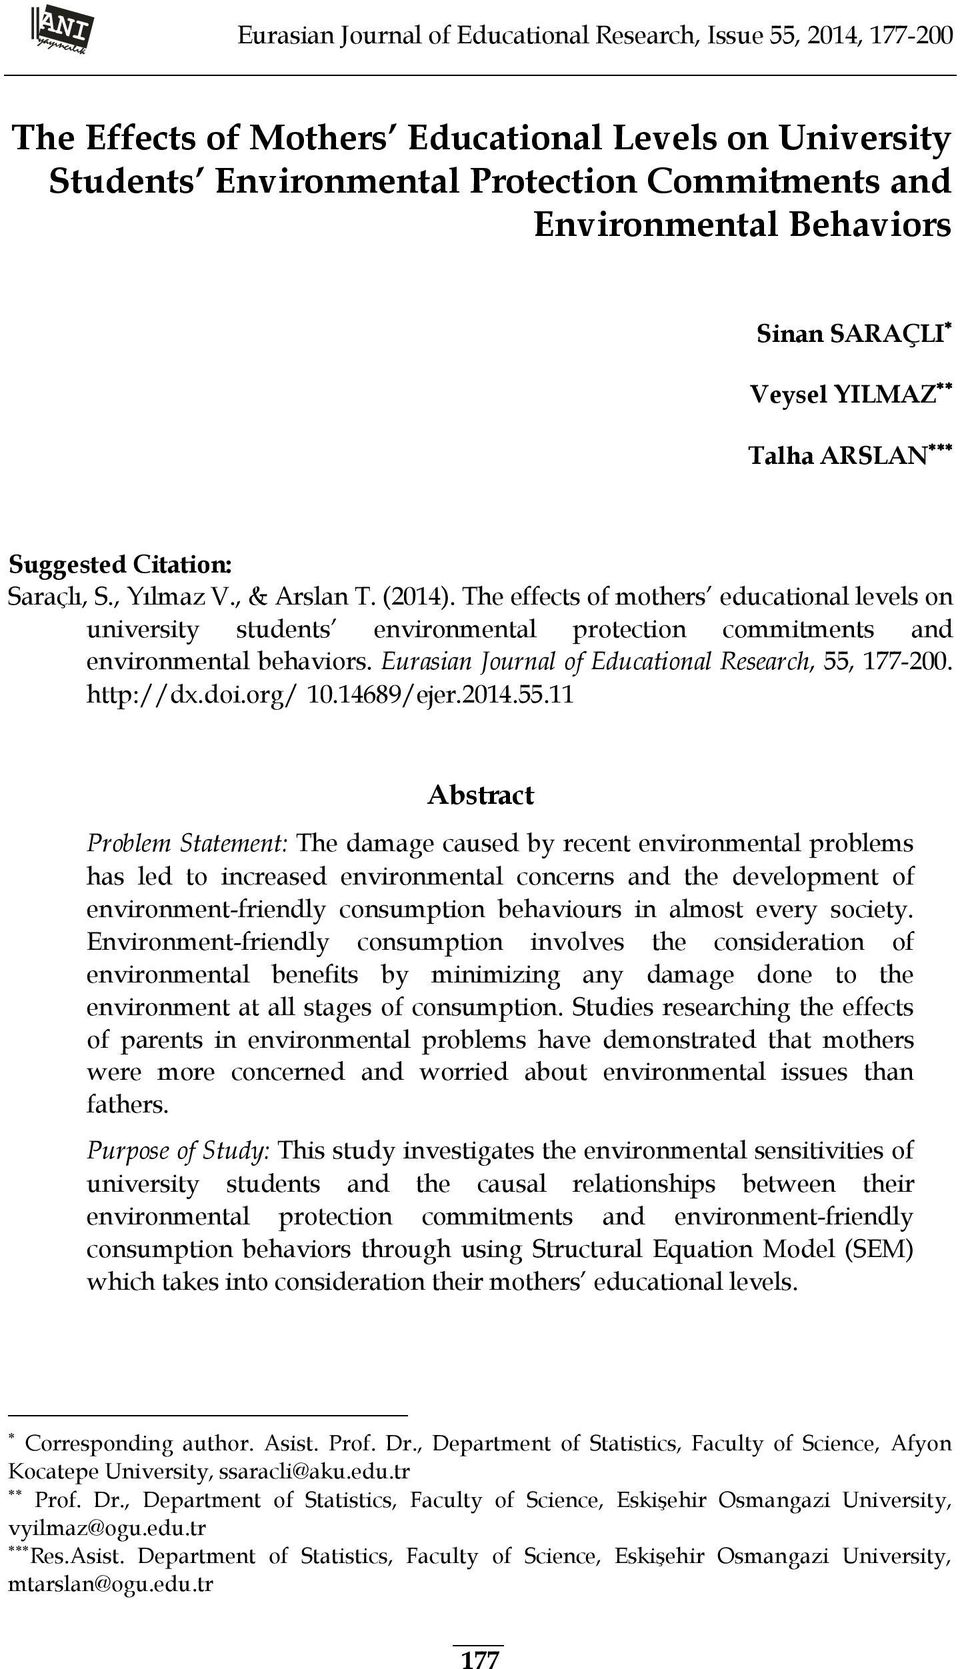 The effects of mothers educational levels on university students environmental protection commitments and environmental behaviors. Eurasian Journal of Educational Research, 55, 177-200. http://dx.doi.